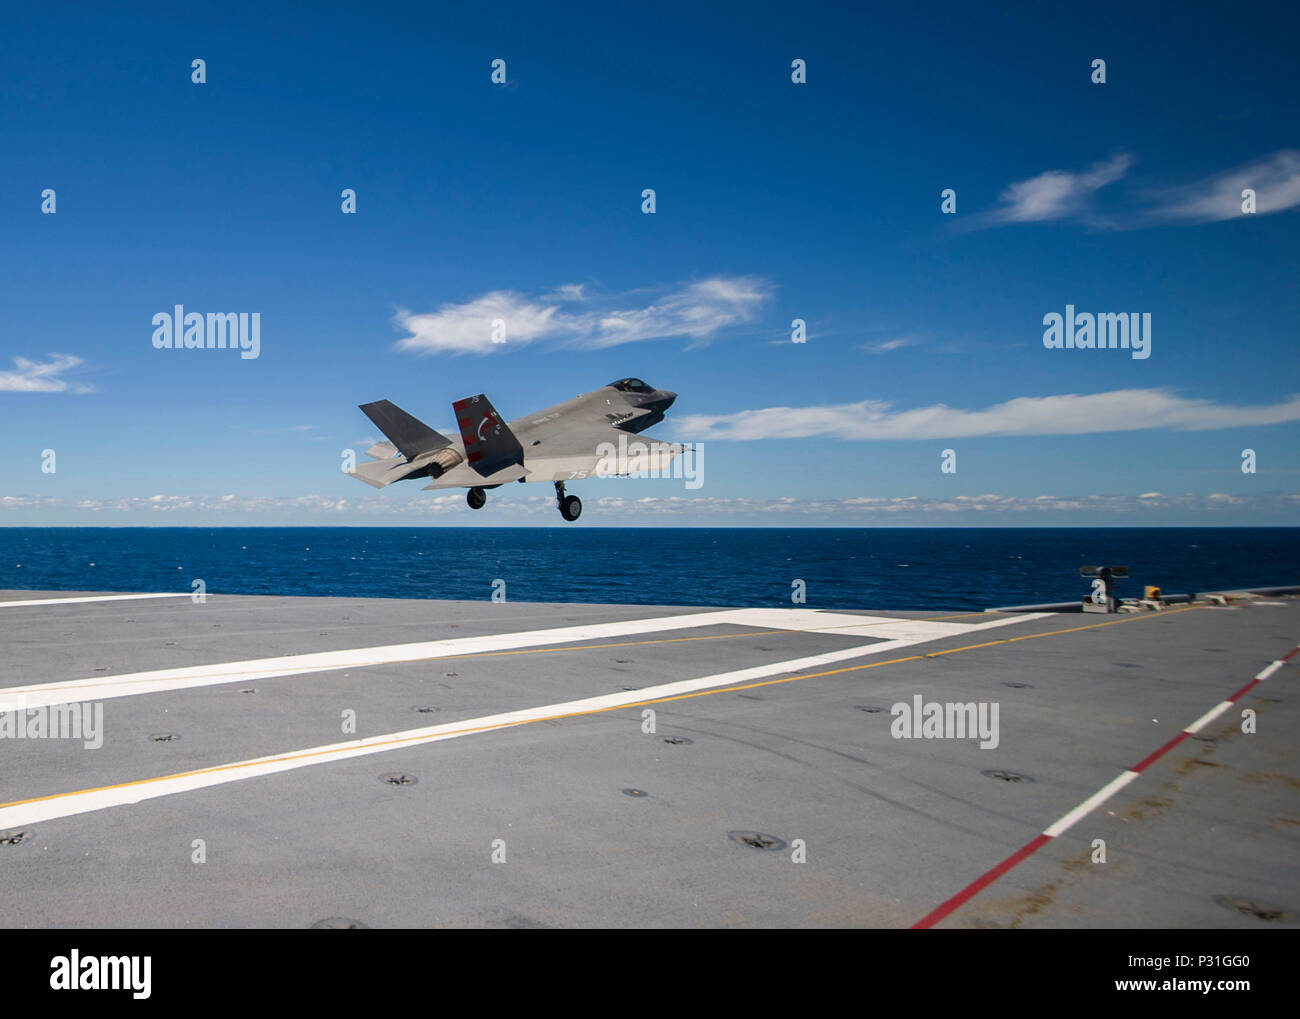 1603 N Rg522 125 Atlantic Ocean Aug 23 16 An F 35c Lightning Ii Carrier Variant Assigned To The Salty Dogs Of Air Test And Evaluation Squadron Vx 23 Launches Off The Flight Deck Of The